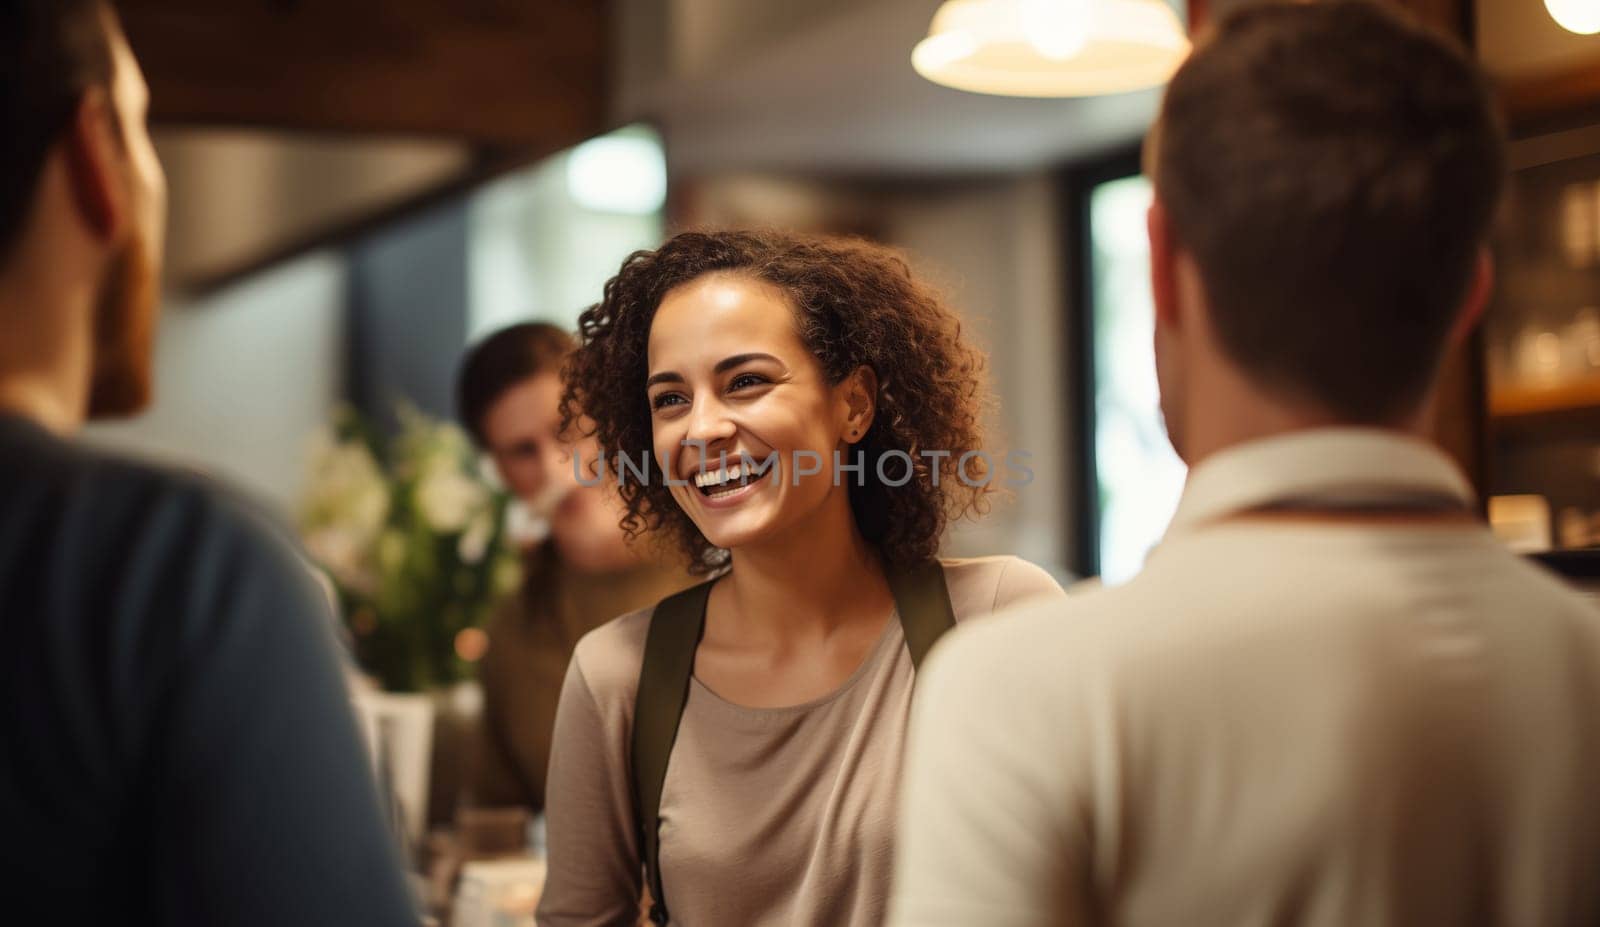 Portrait of happy smiling young woman client in coffee house or cafe, looking at camera